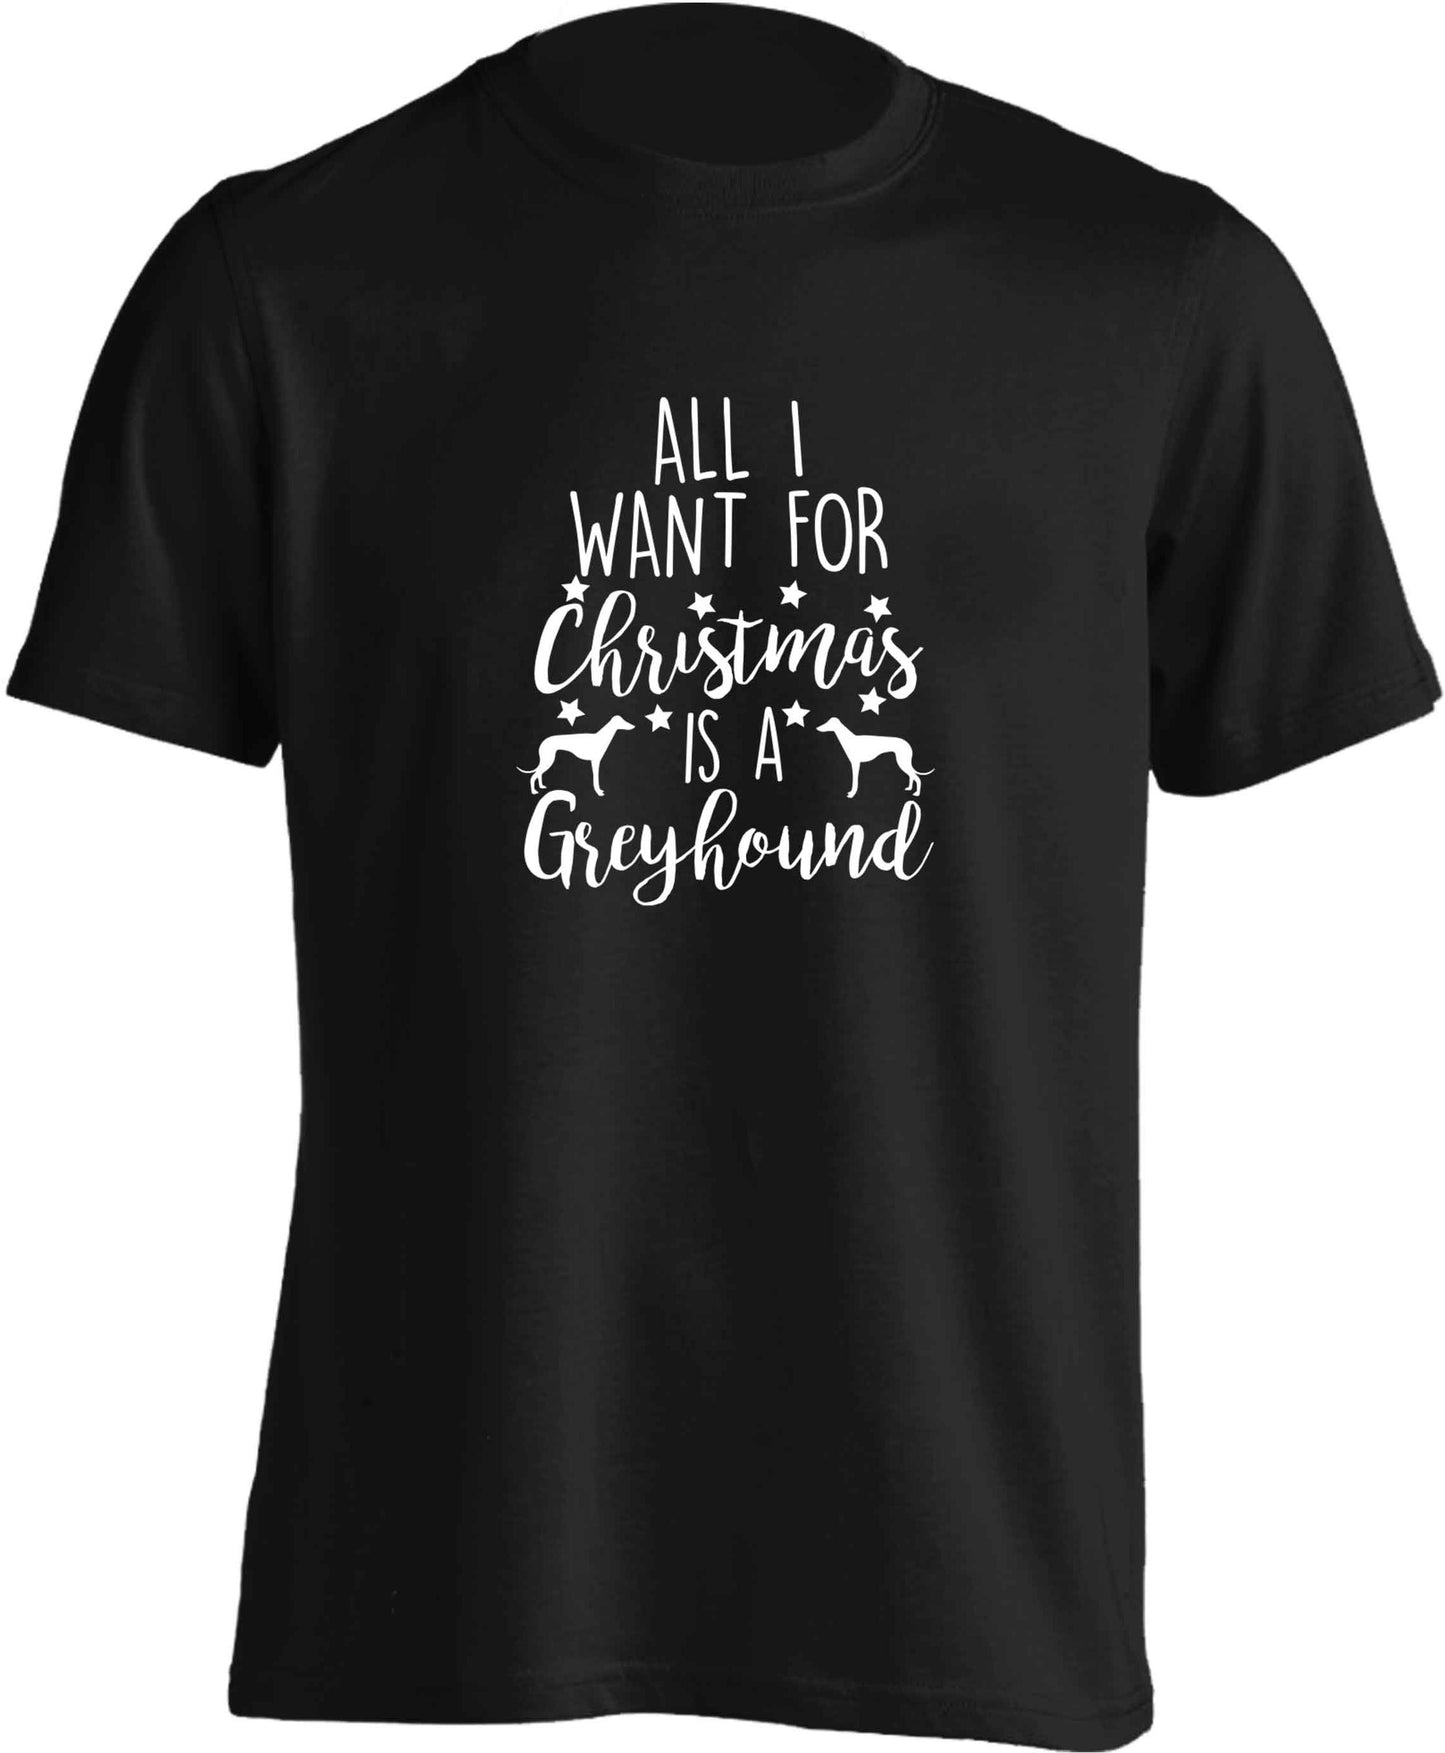 All I want for Christmas is a greyhound adults unisex black Tshirt 2XL